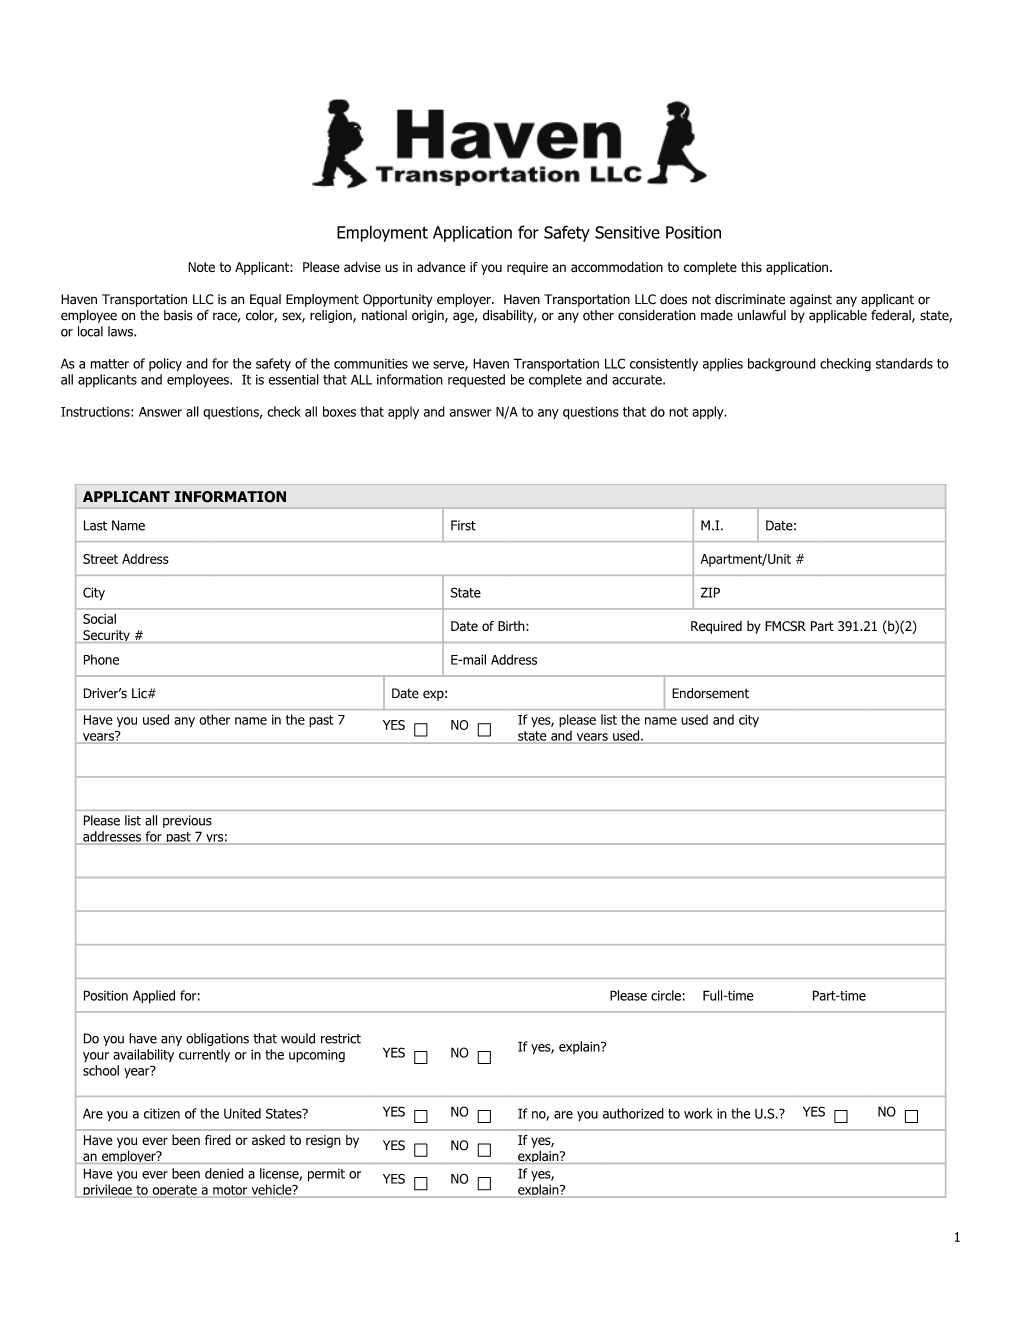 Employment Applicationfor Safety Sensitive Position